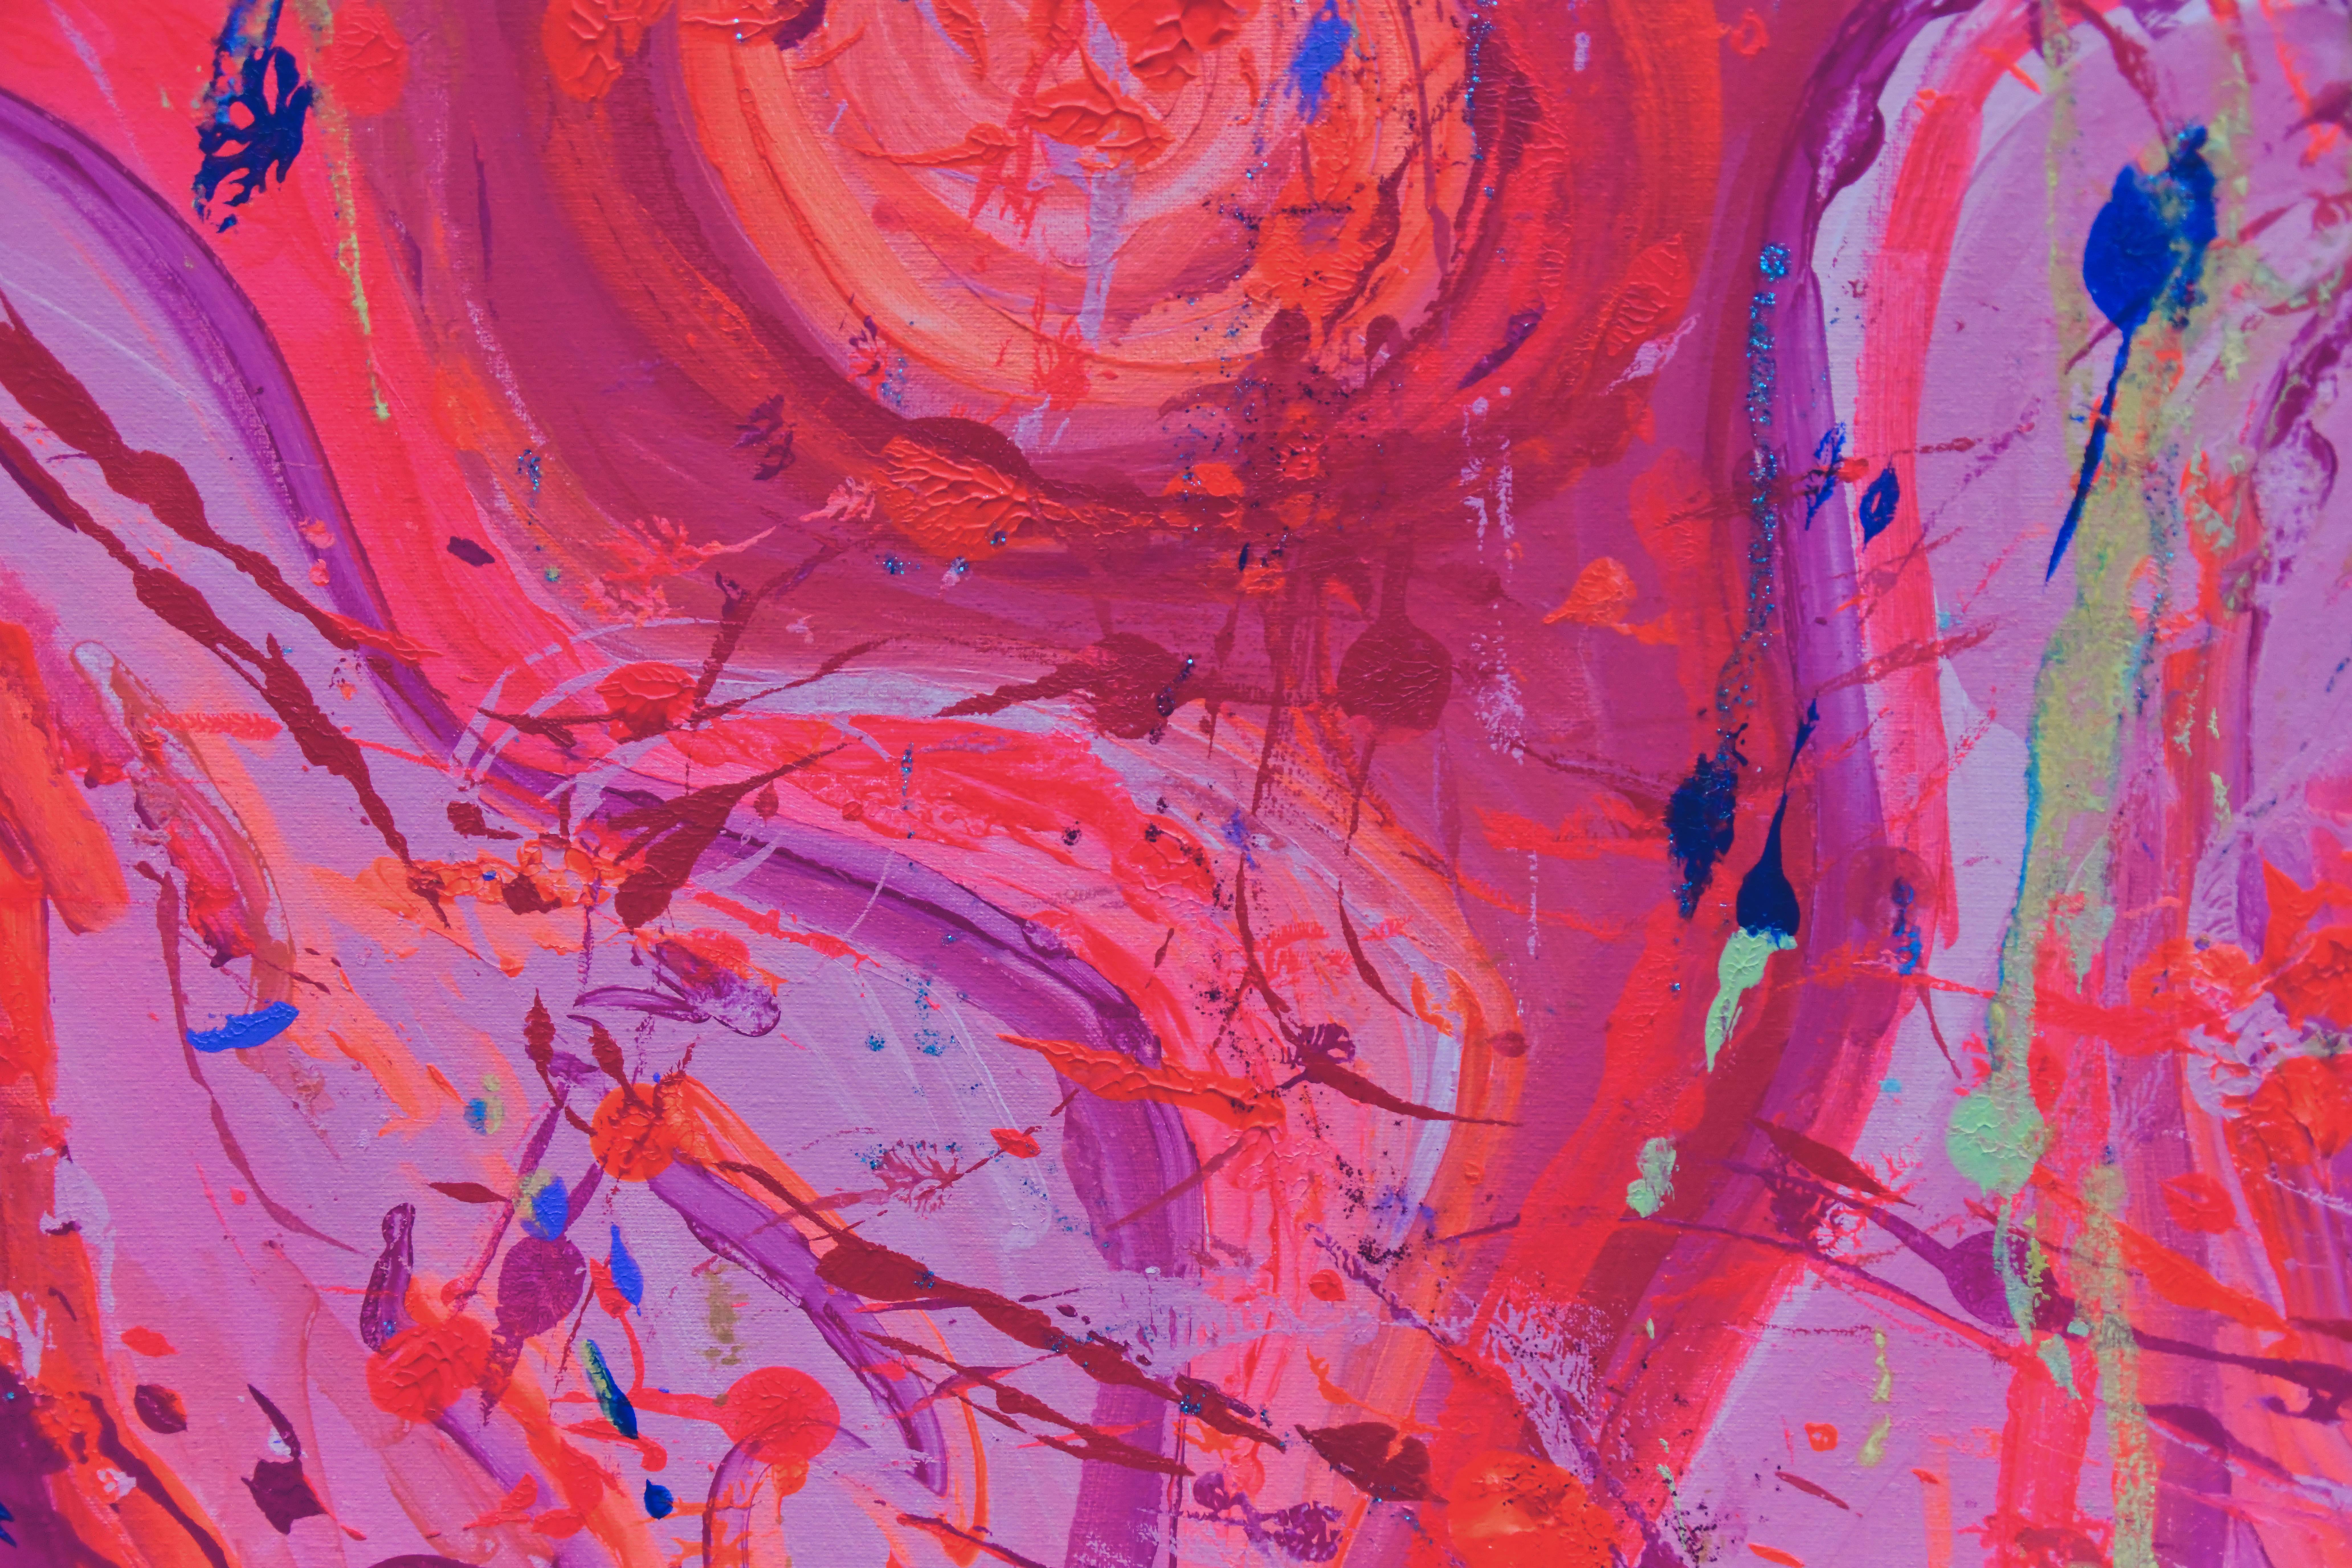 Abstract portraints 2 - Pink Abstract Painting by Elena Bandurka